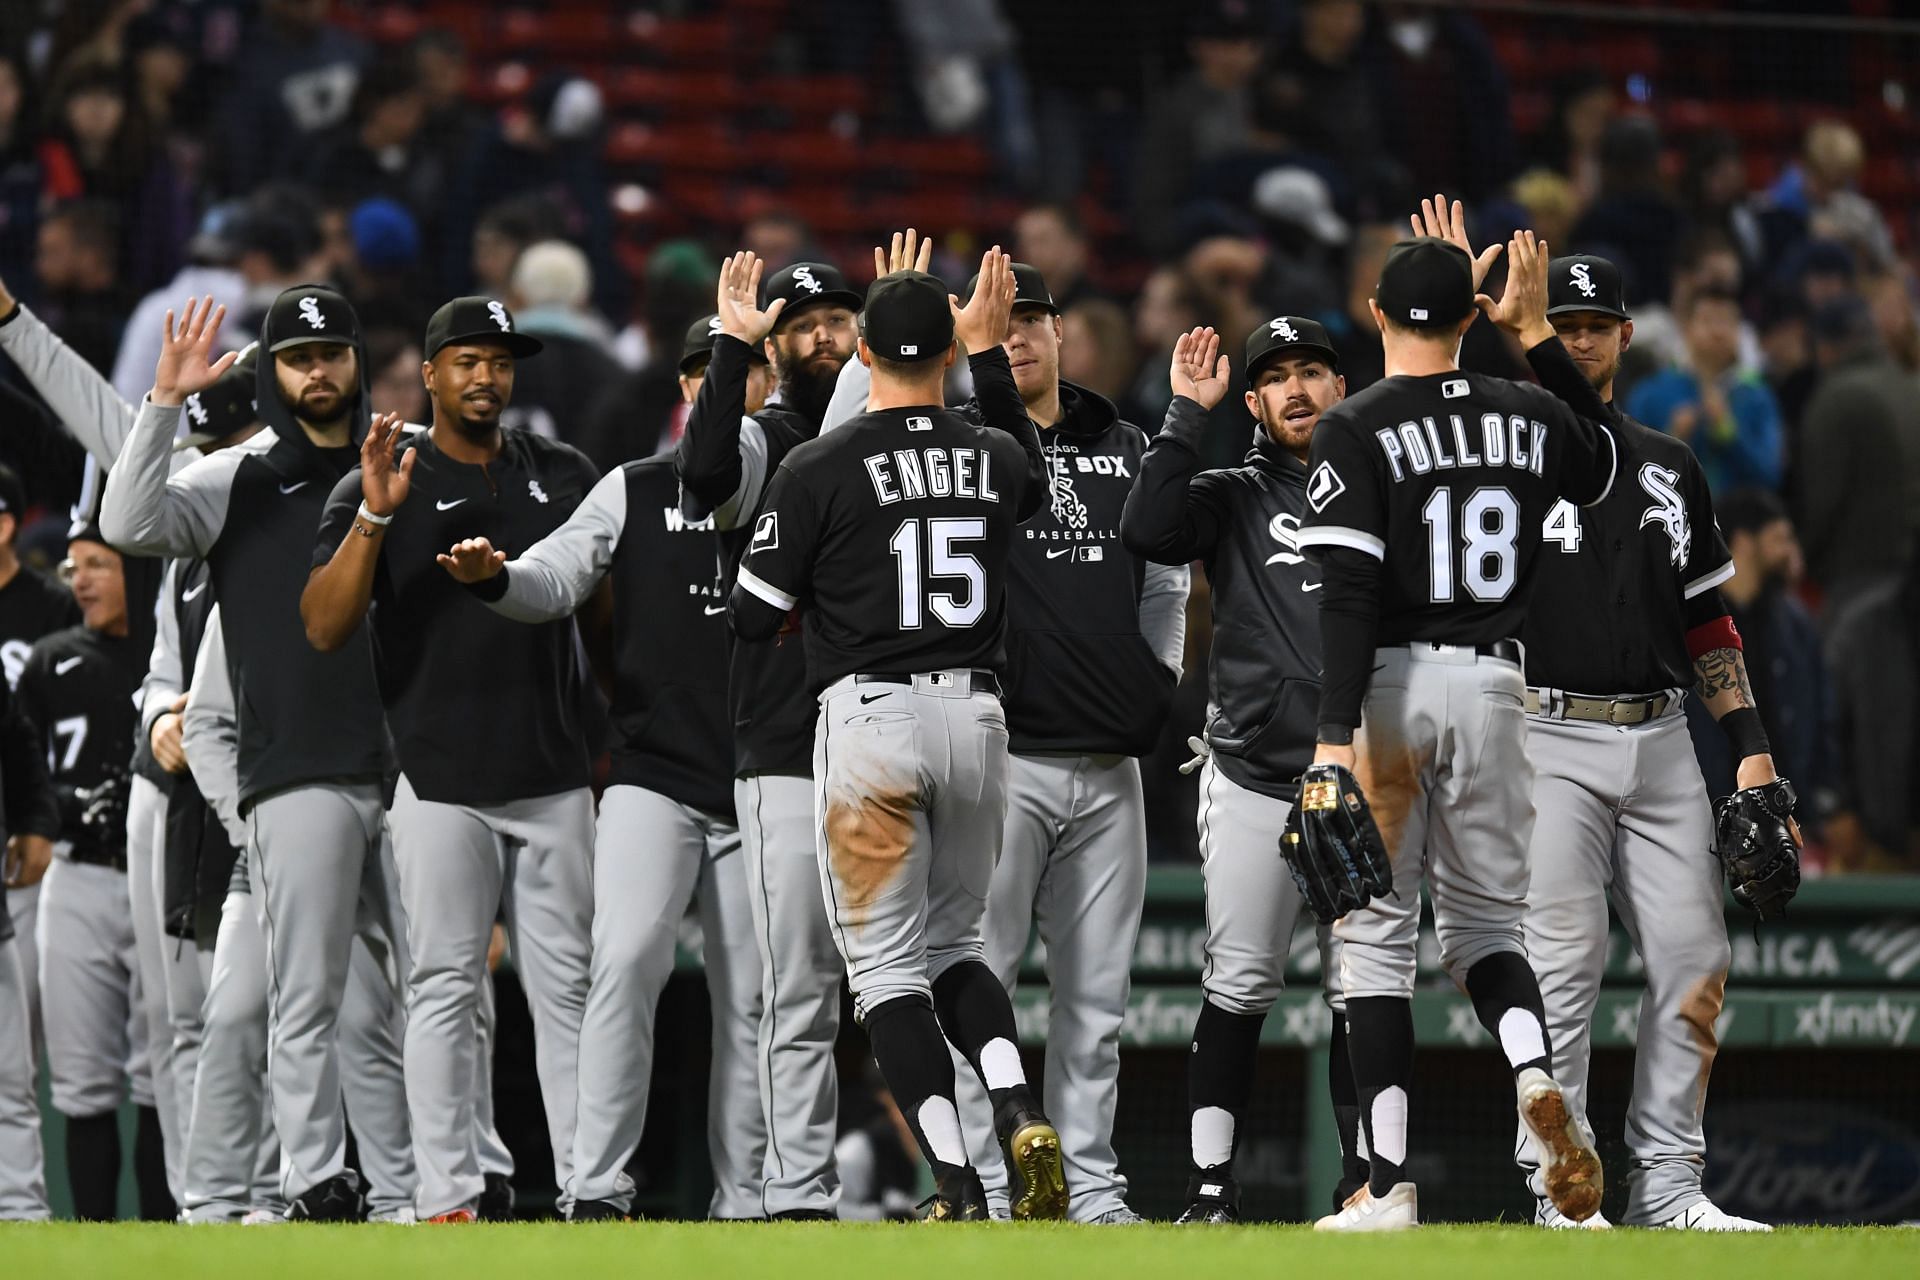 Adam Engel and AJ Pollock of the Chicago White Sox high-five teammates after beating the Boston Red Sox.